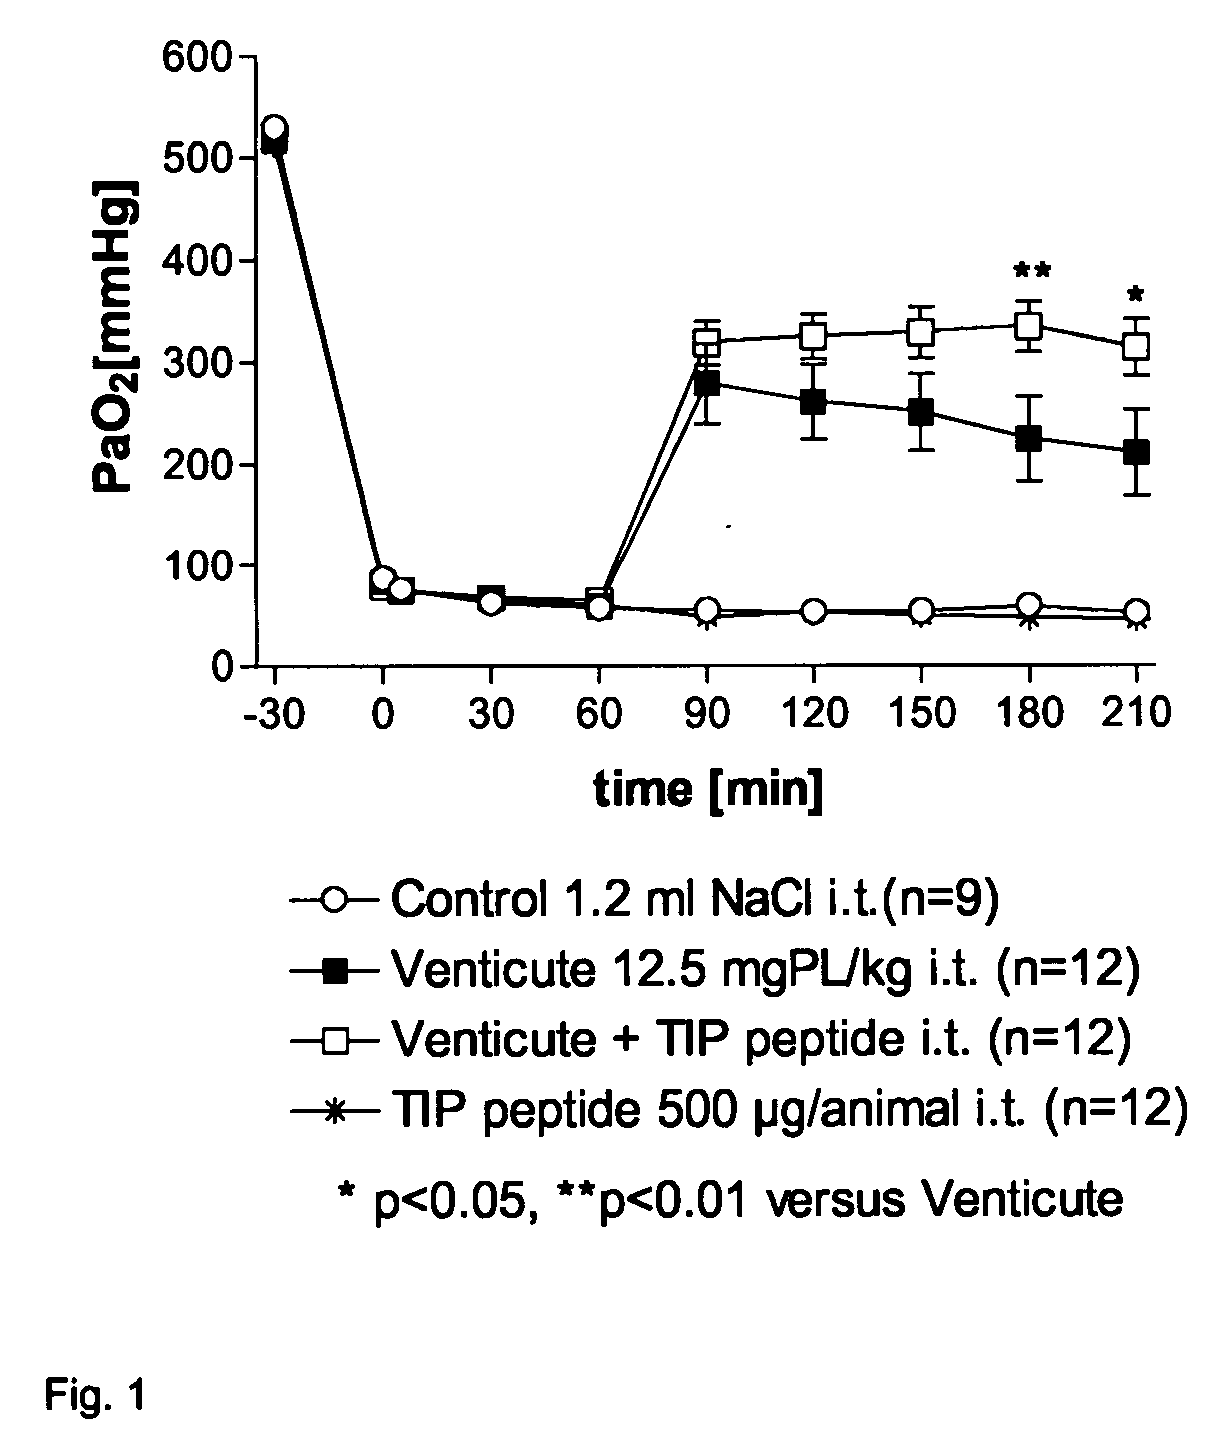 Composition Comprising a Pulmonary Surfactant and a Tnf-Derived Peptide